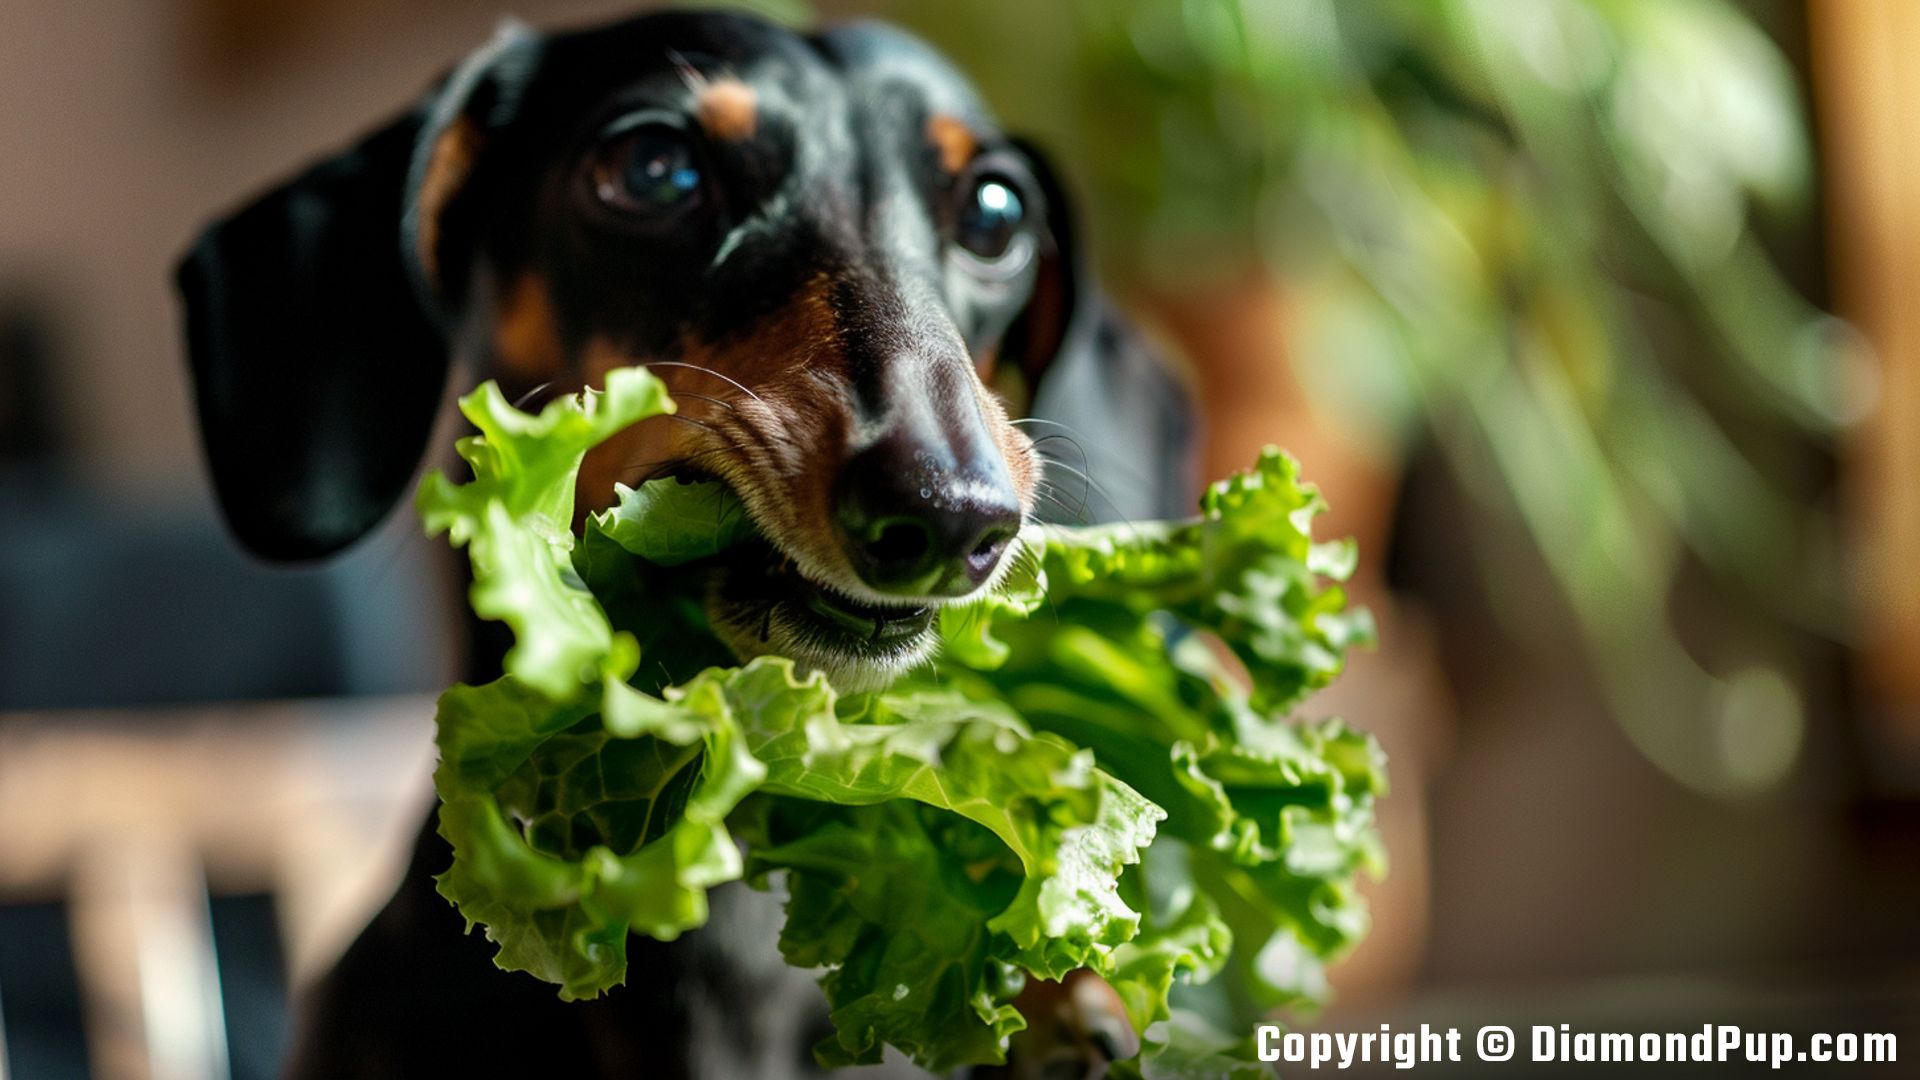 Photograph of Dachshund Snacking on Lettuce